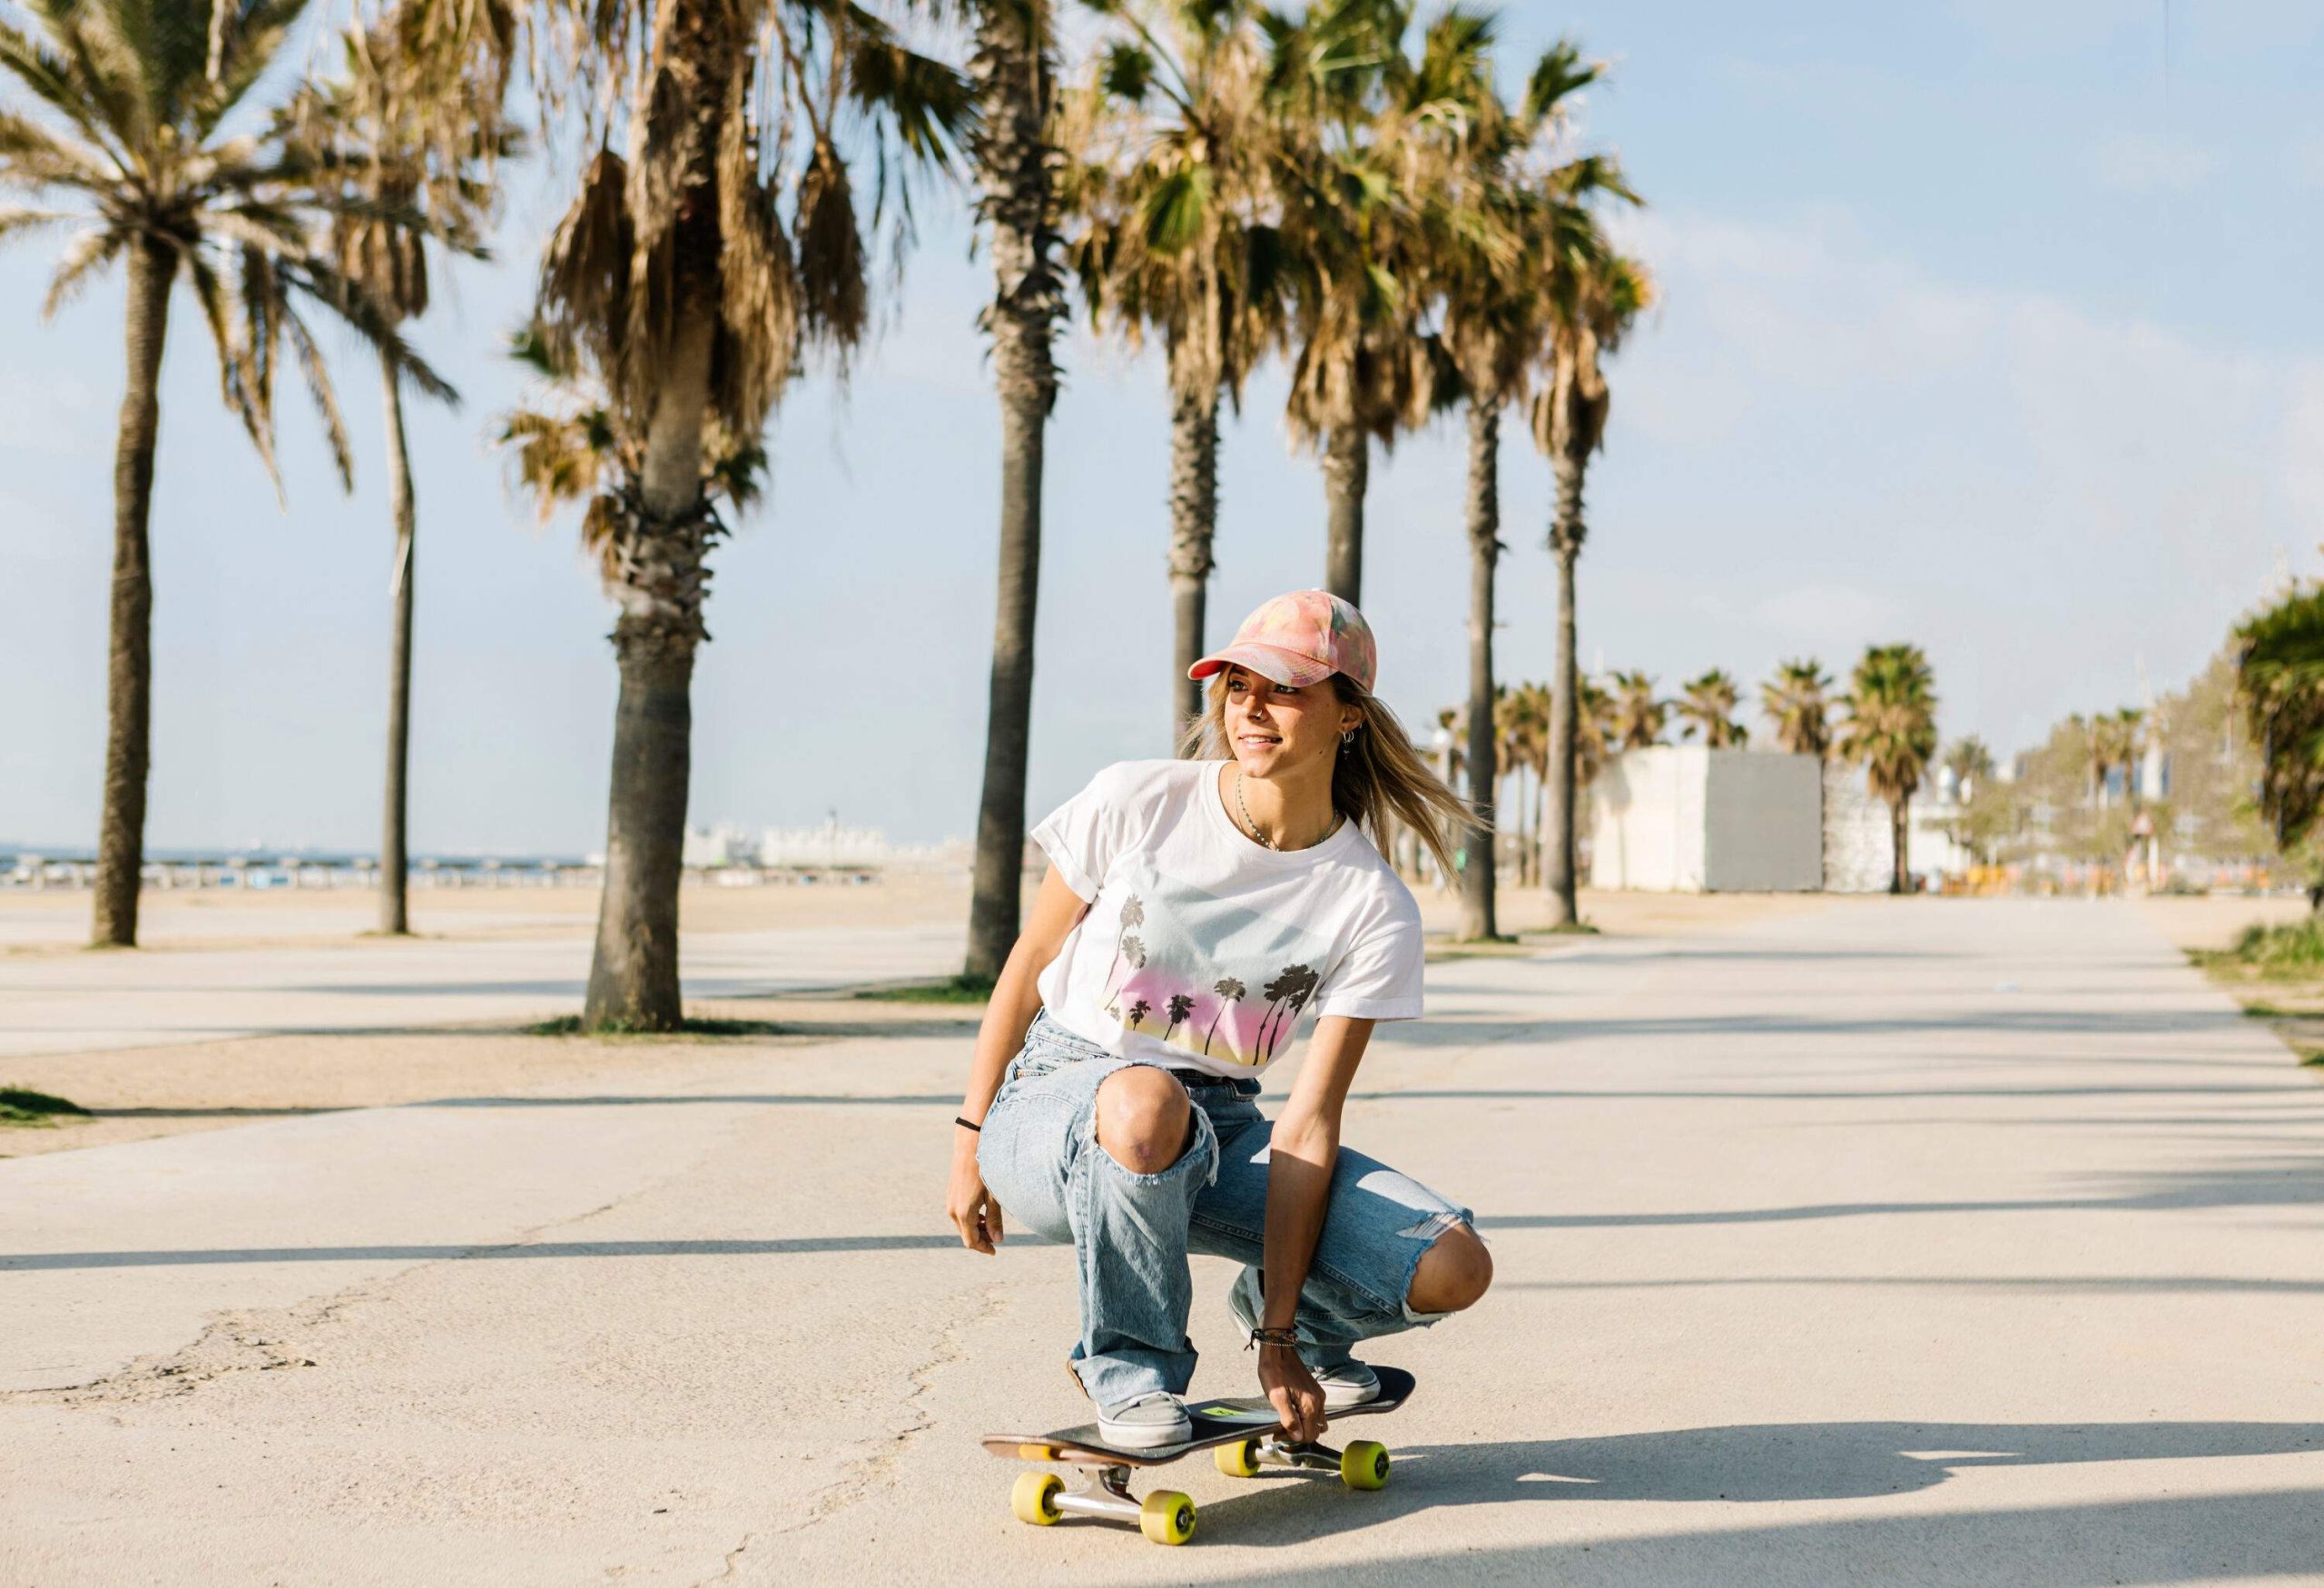 A female riding her skateboard on a paved road of the beach lined with tall trees.